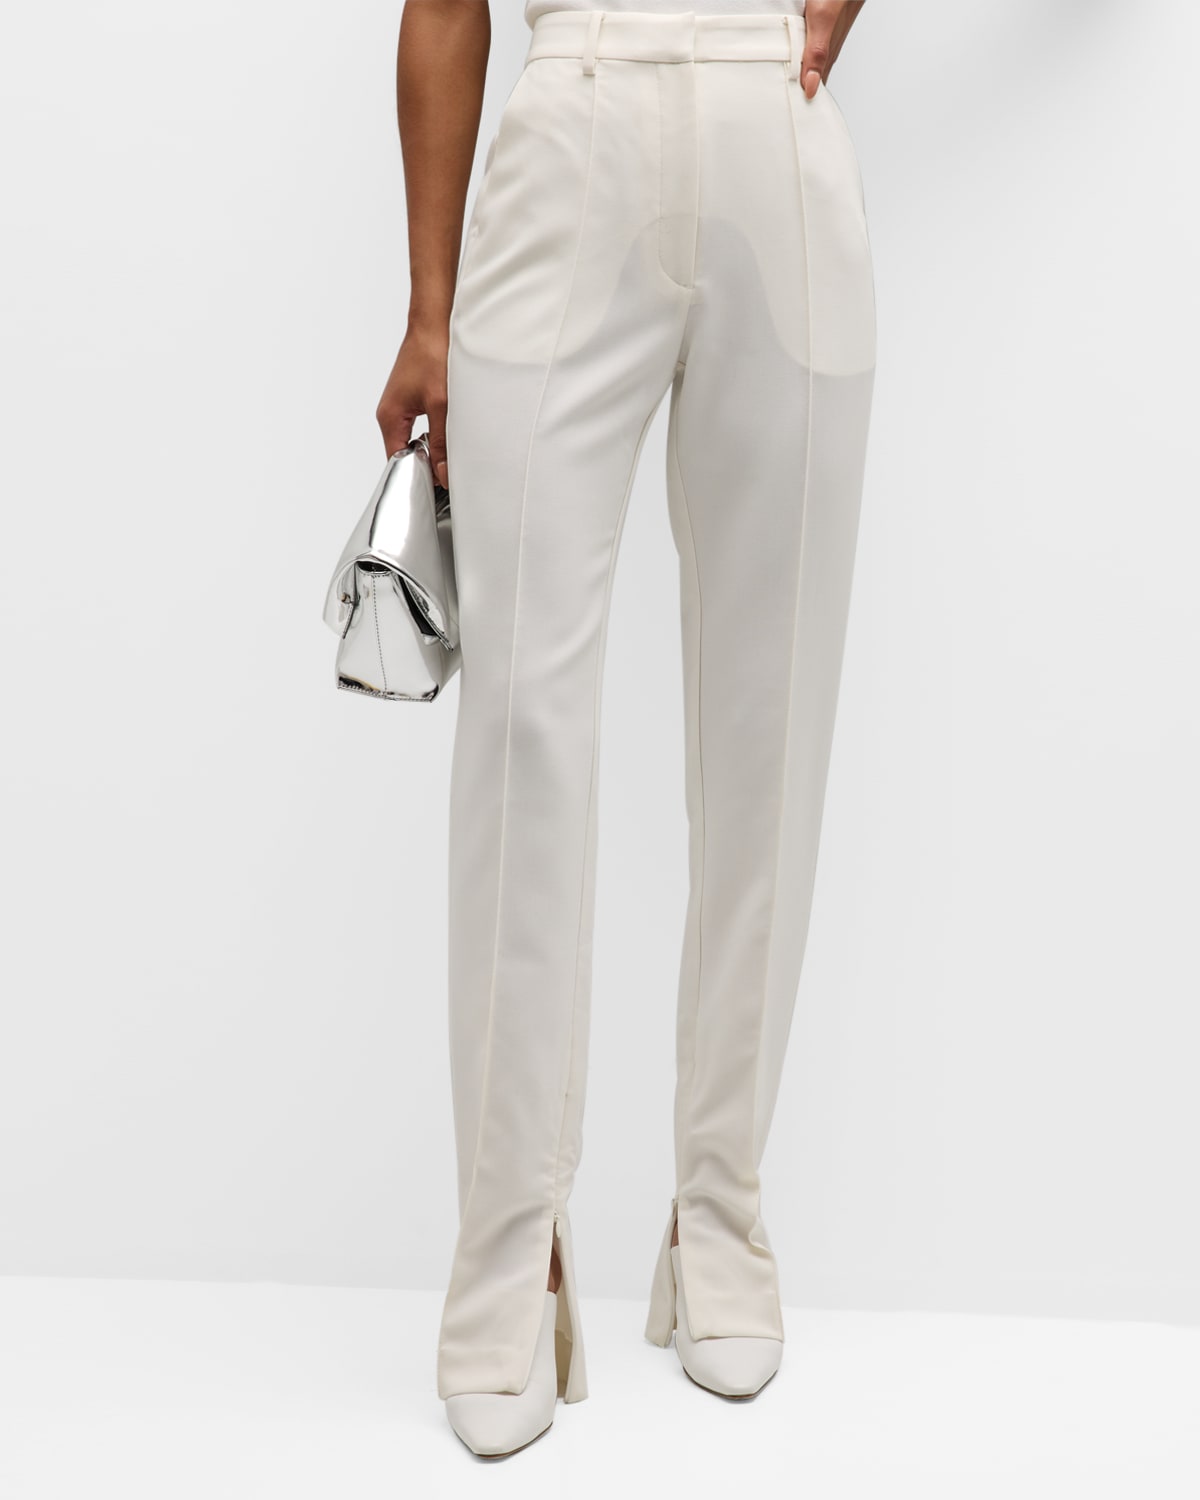 Acler Newland Zip-hem Suiting Pants In Ivory